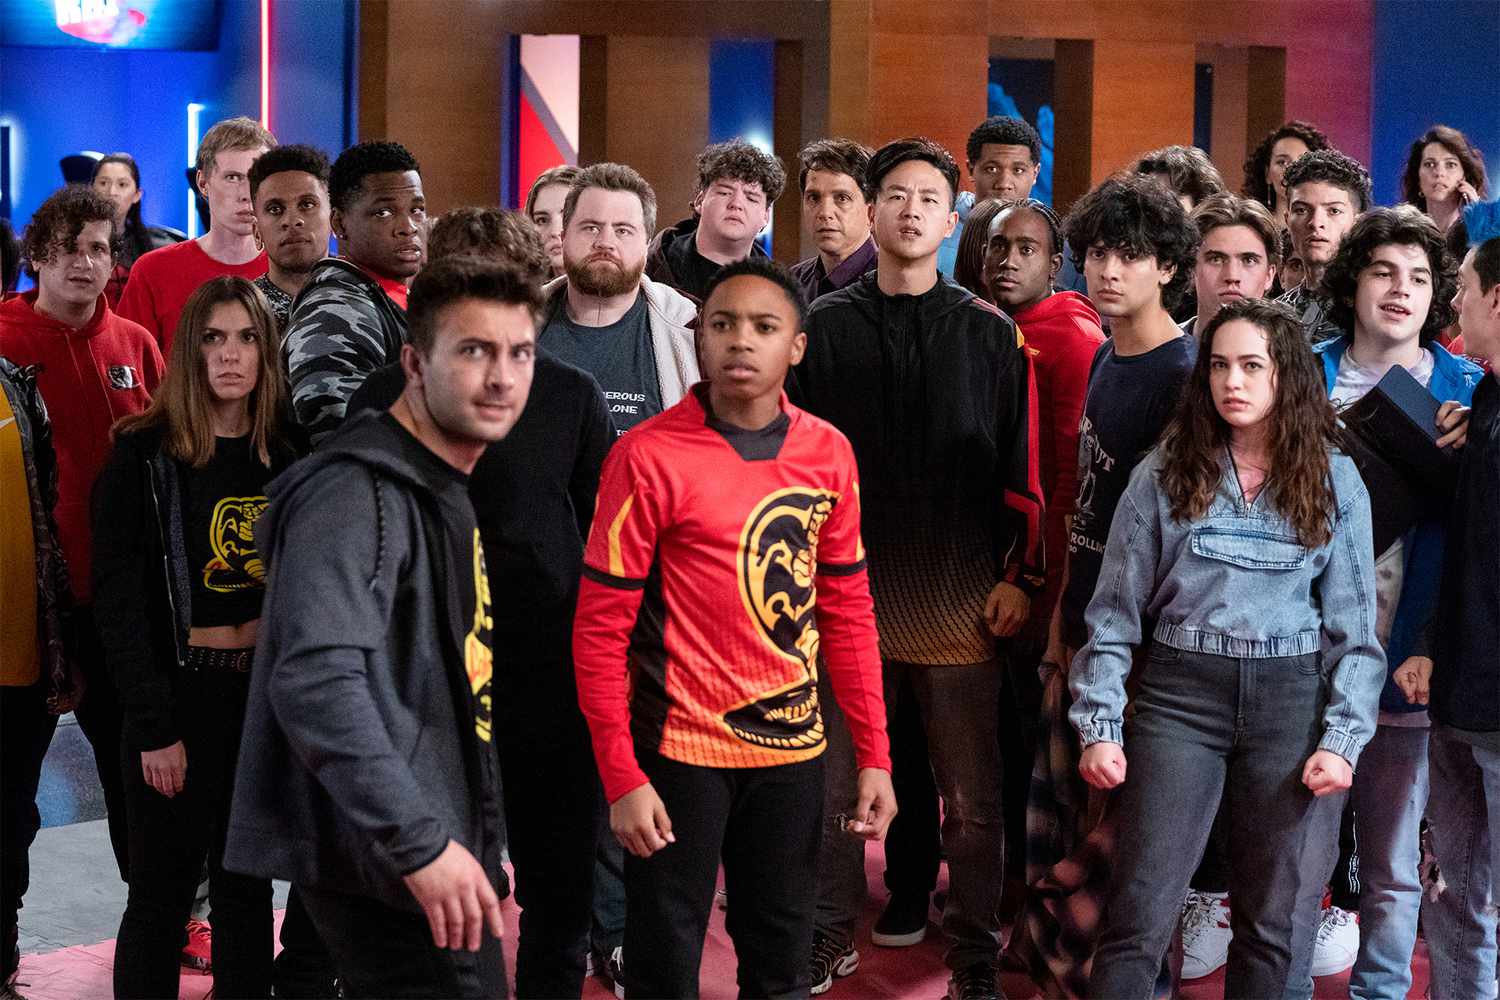 Behind the Scenes Peek: What to Expect from Cobra Kai's Epic Final Season